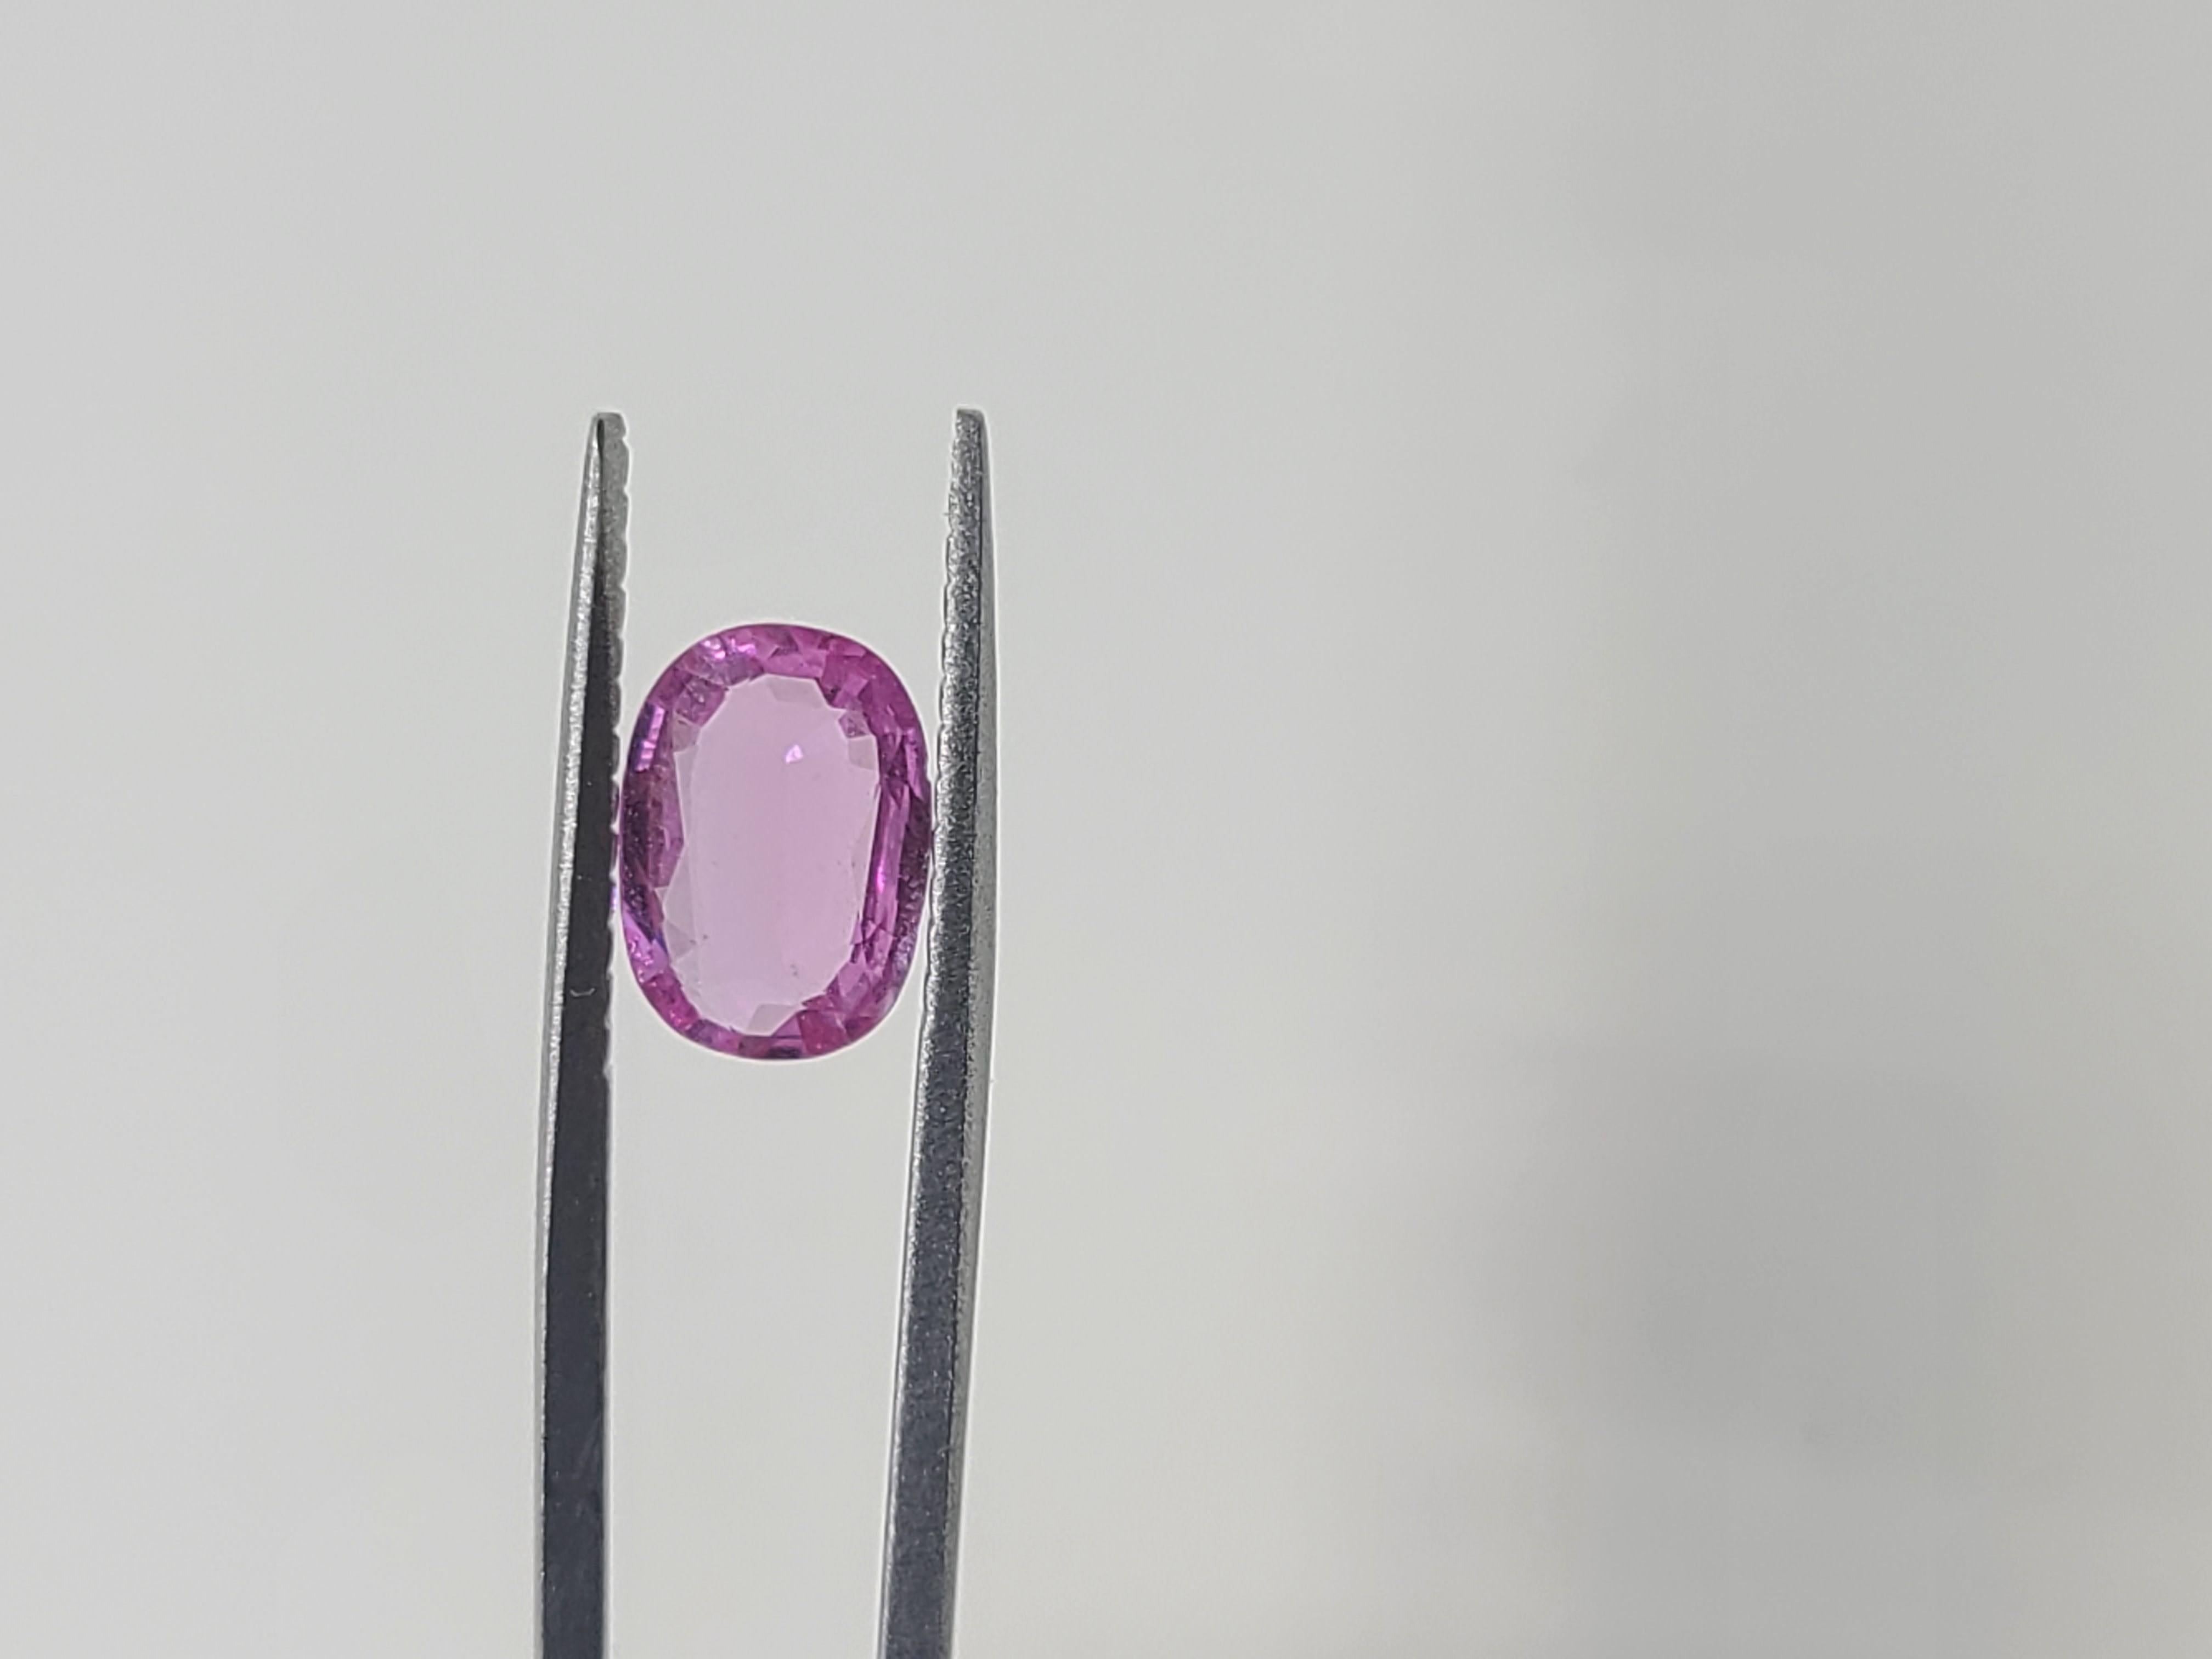 1.15 Carat Pink Sapphire 8x5mm Oval Faceted Cut - Single Loose Stone In Excellent Condition For Sale In Endwell, NY